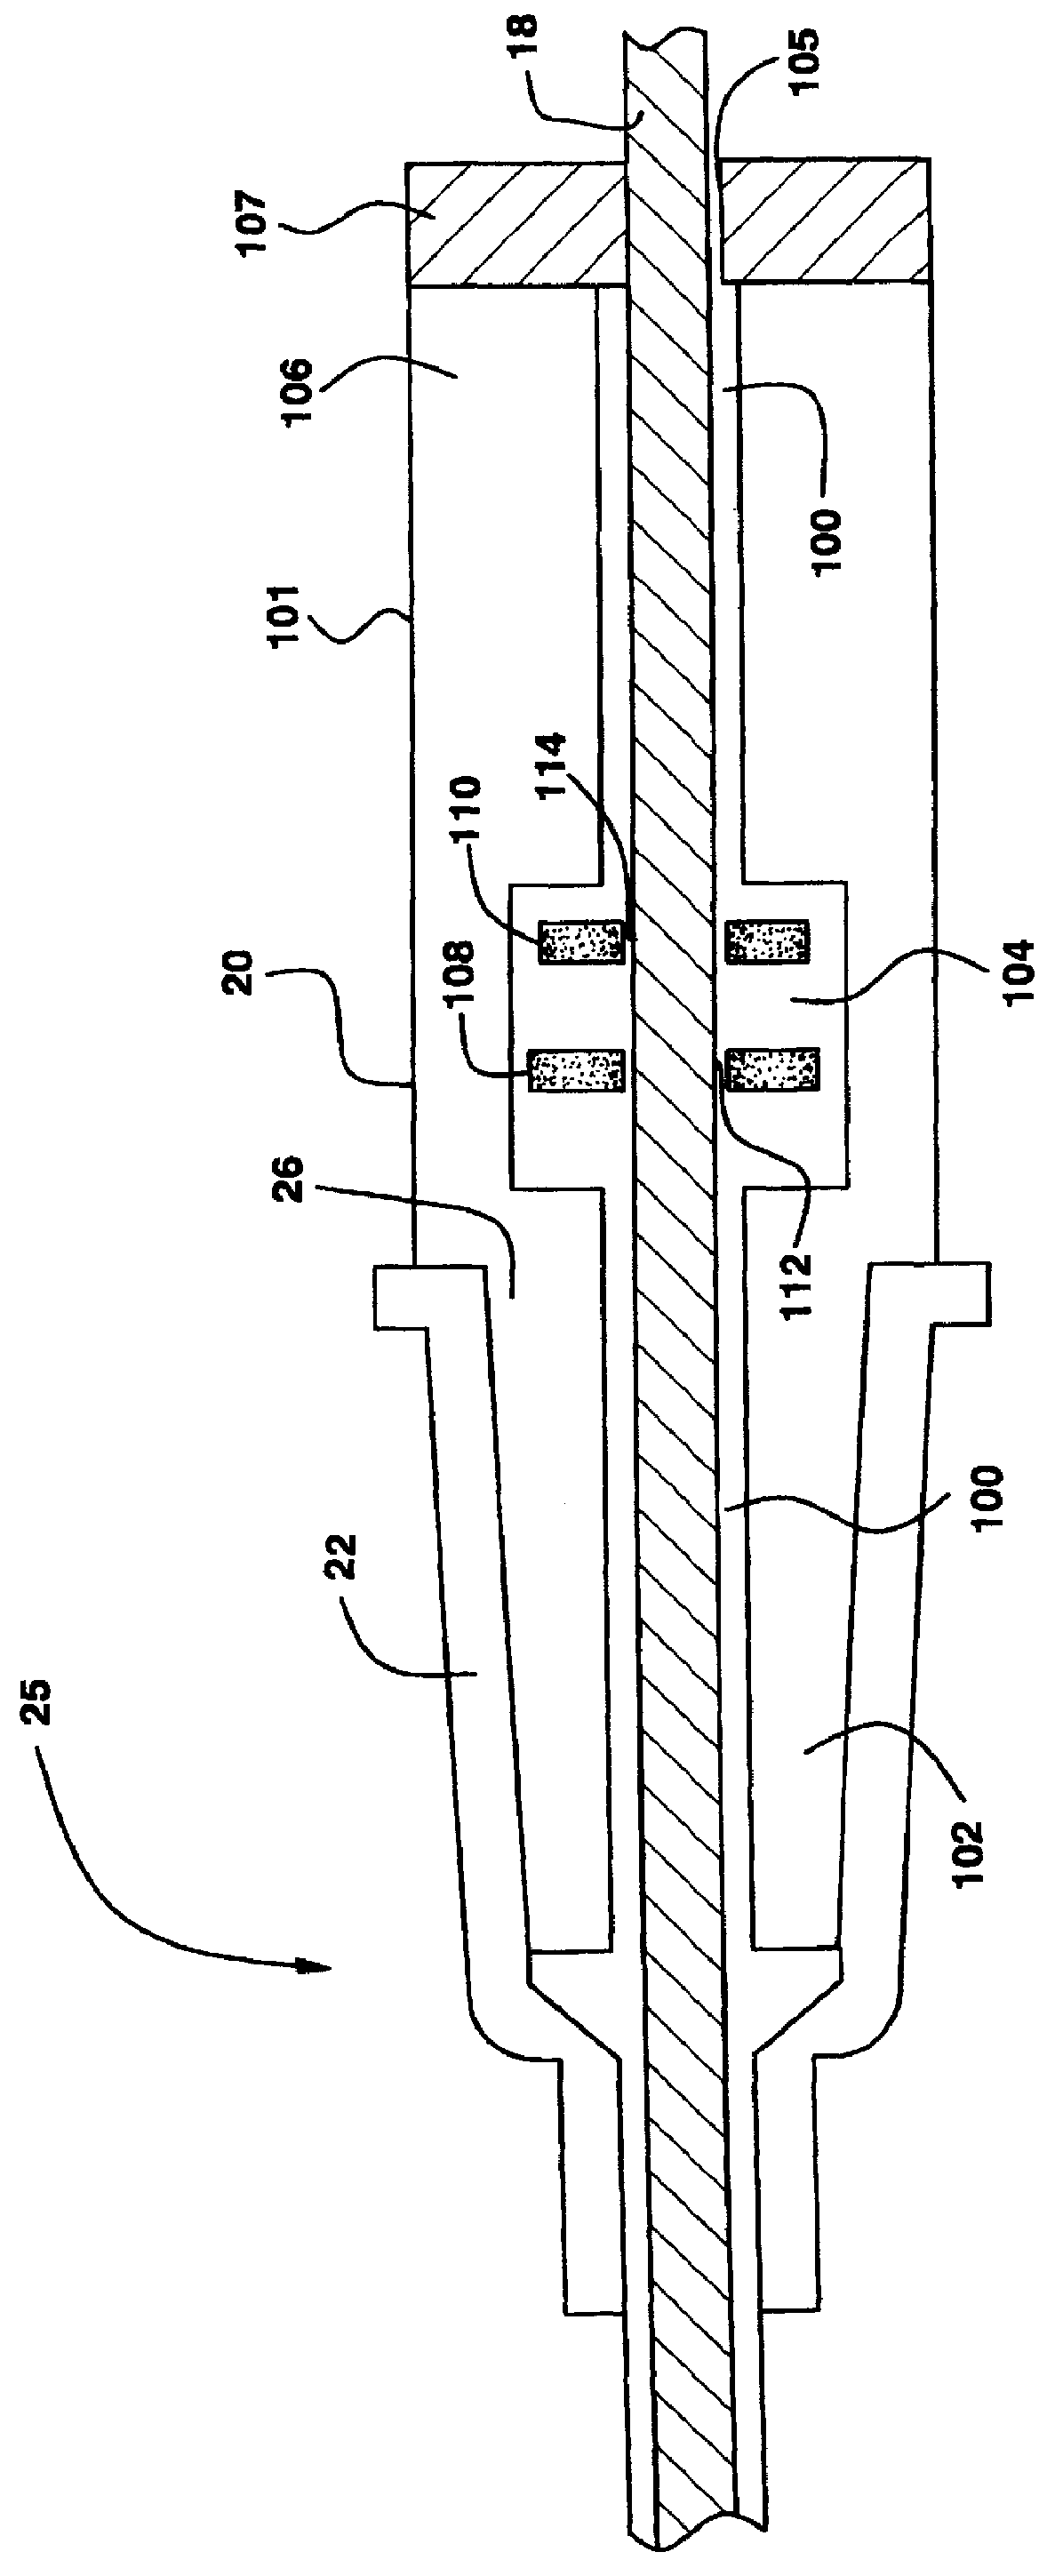 Method for forming a rib on a cannula for a tip protection device